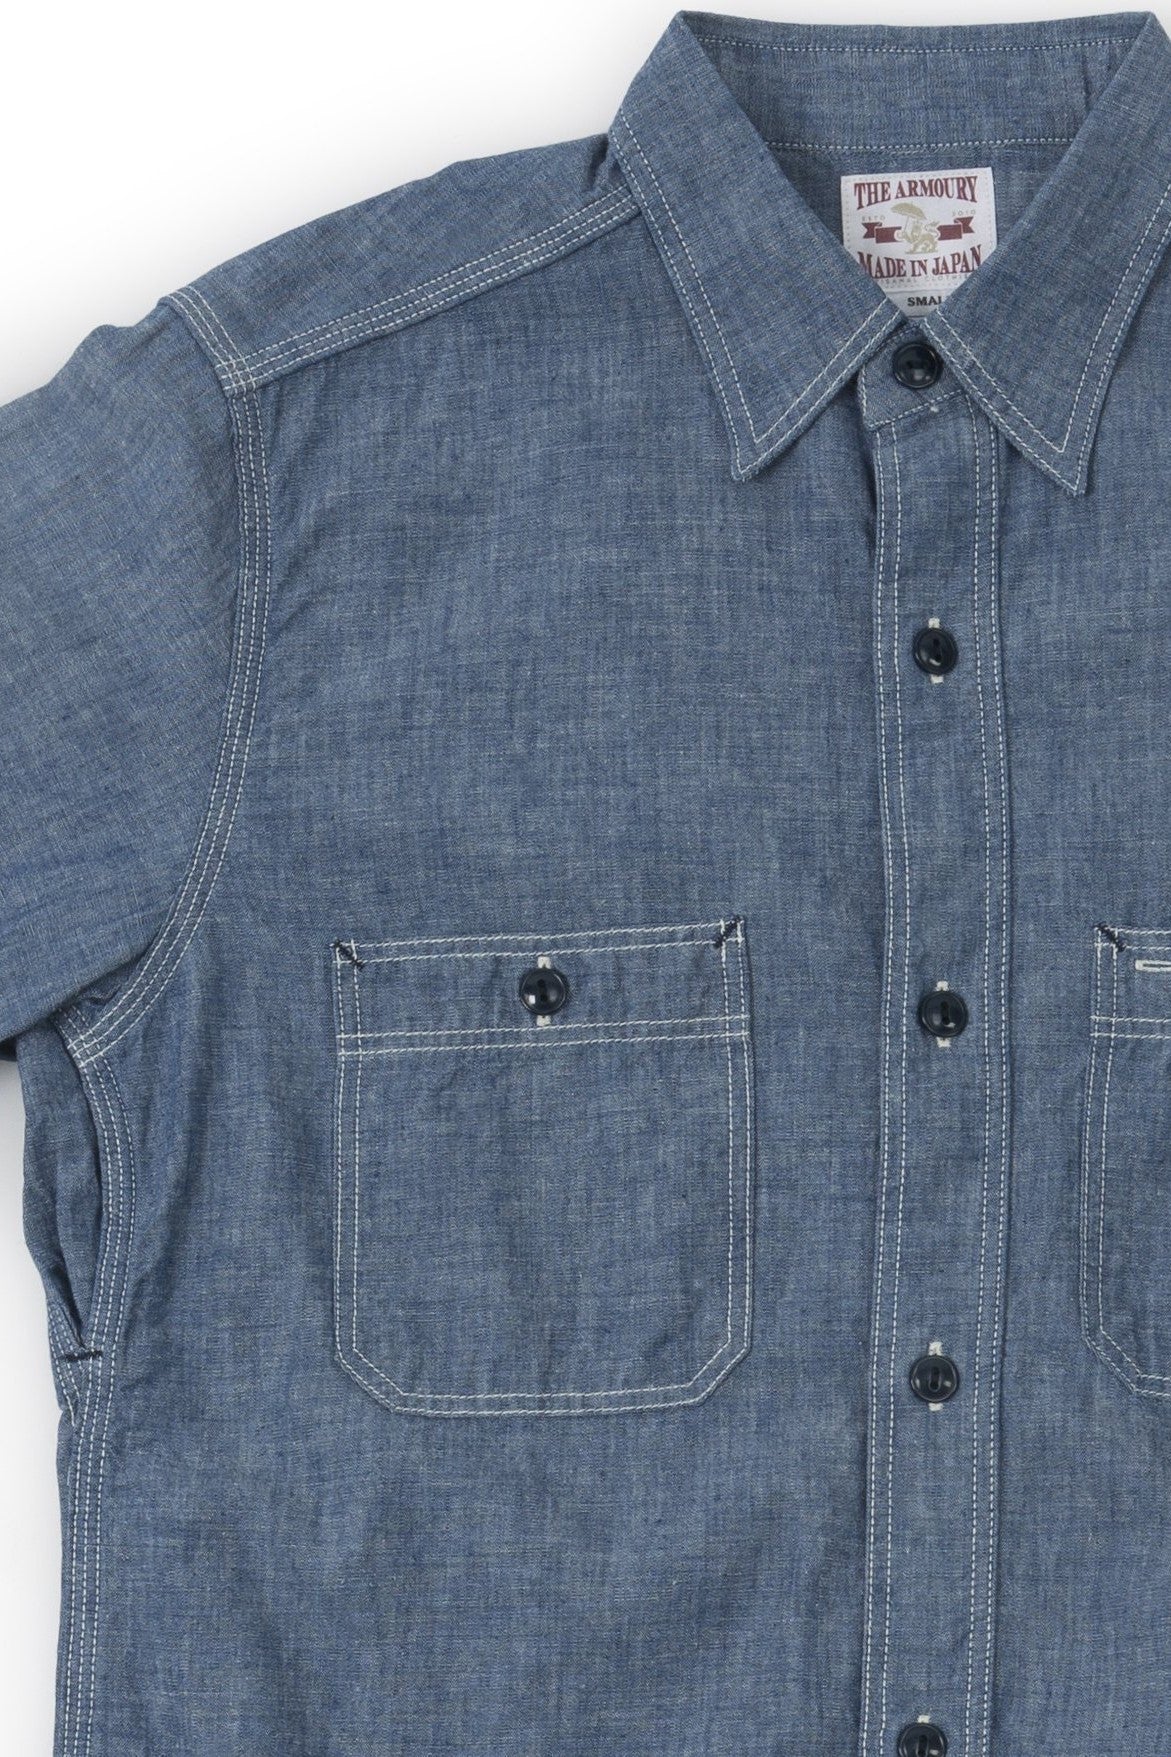 The Real McCoy's X The Armoury Blue Chambray Shirt